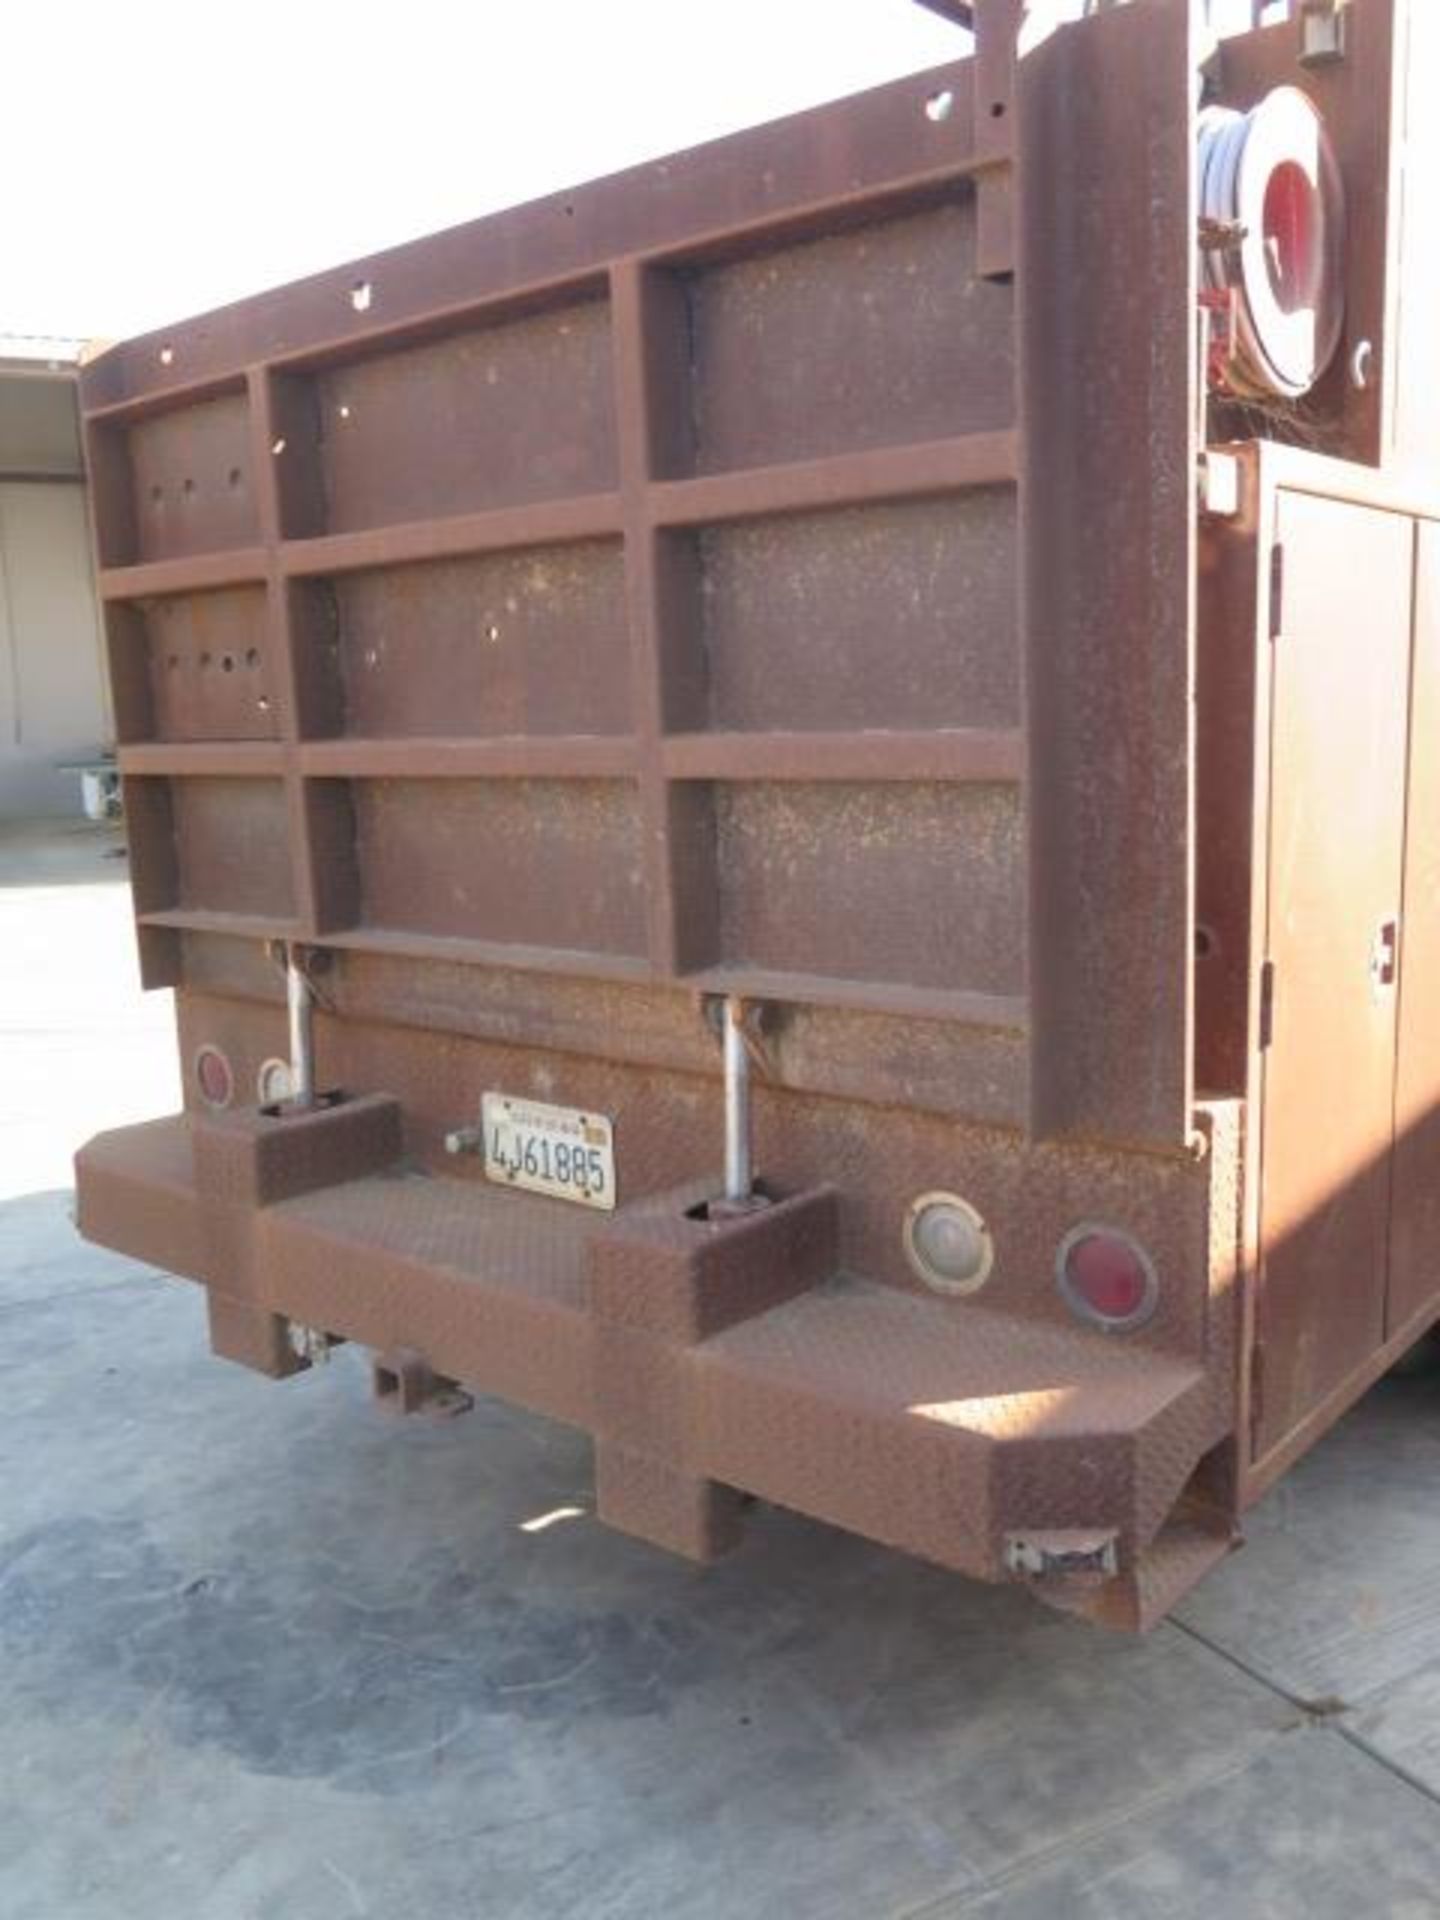 1992 GMC Top Kick Service Truck Lisc# 4J61885 w/ Caterpillar Diesel Engine, Automatic, SOLD AS IS - Image 9 of 24